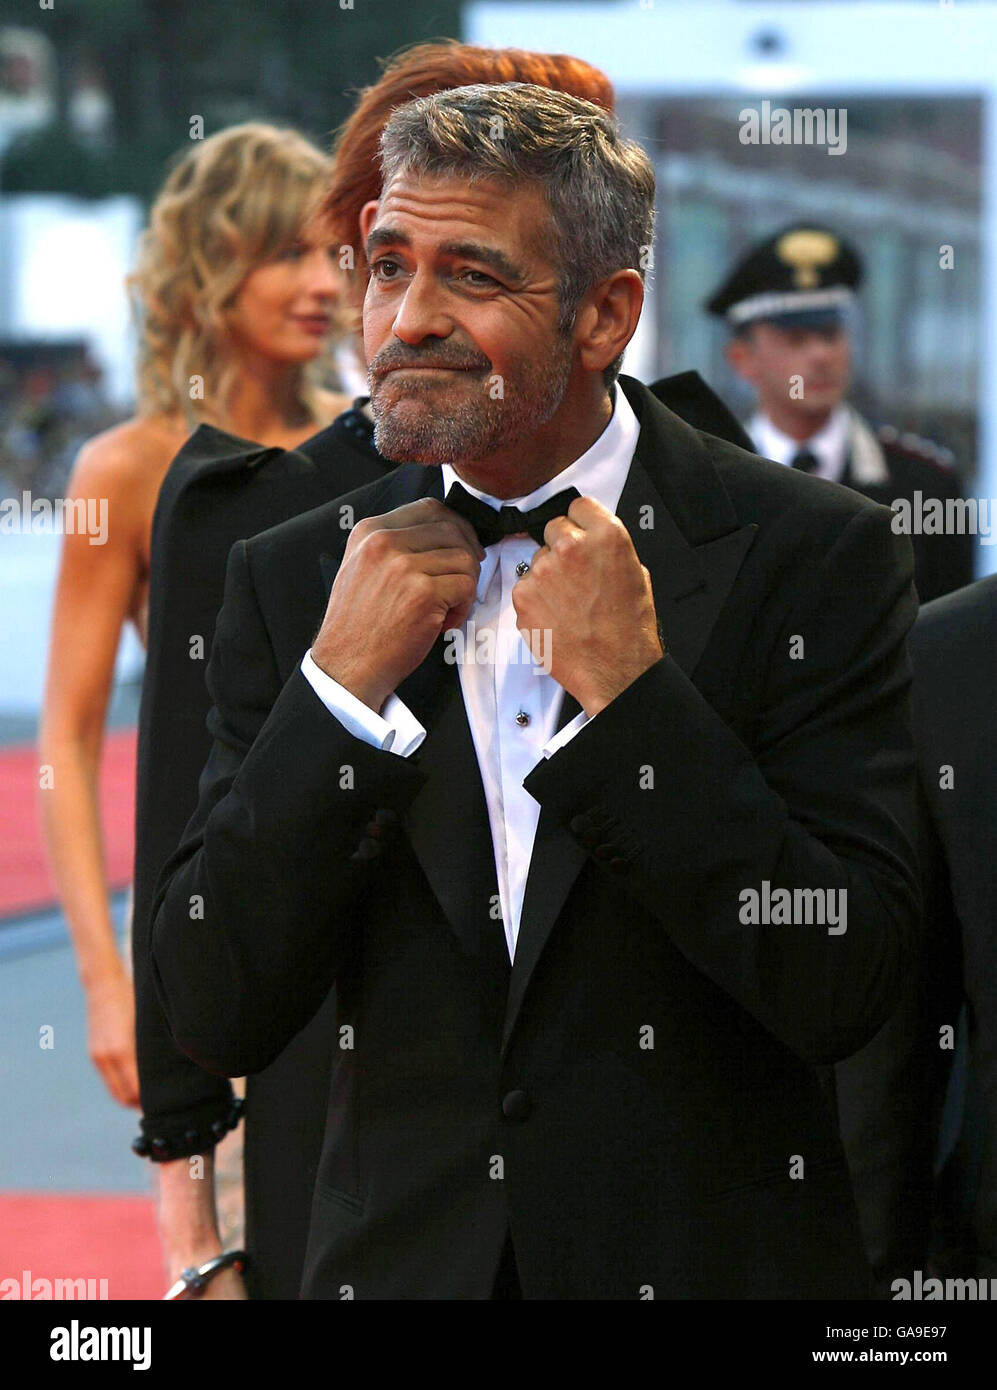 George Clooney arrives for the premiere of his film 'Michael Clayton', during the Venice Film Festival in Venice, Italy. Stock Photo